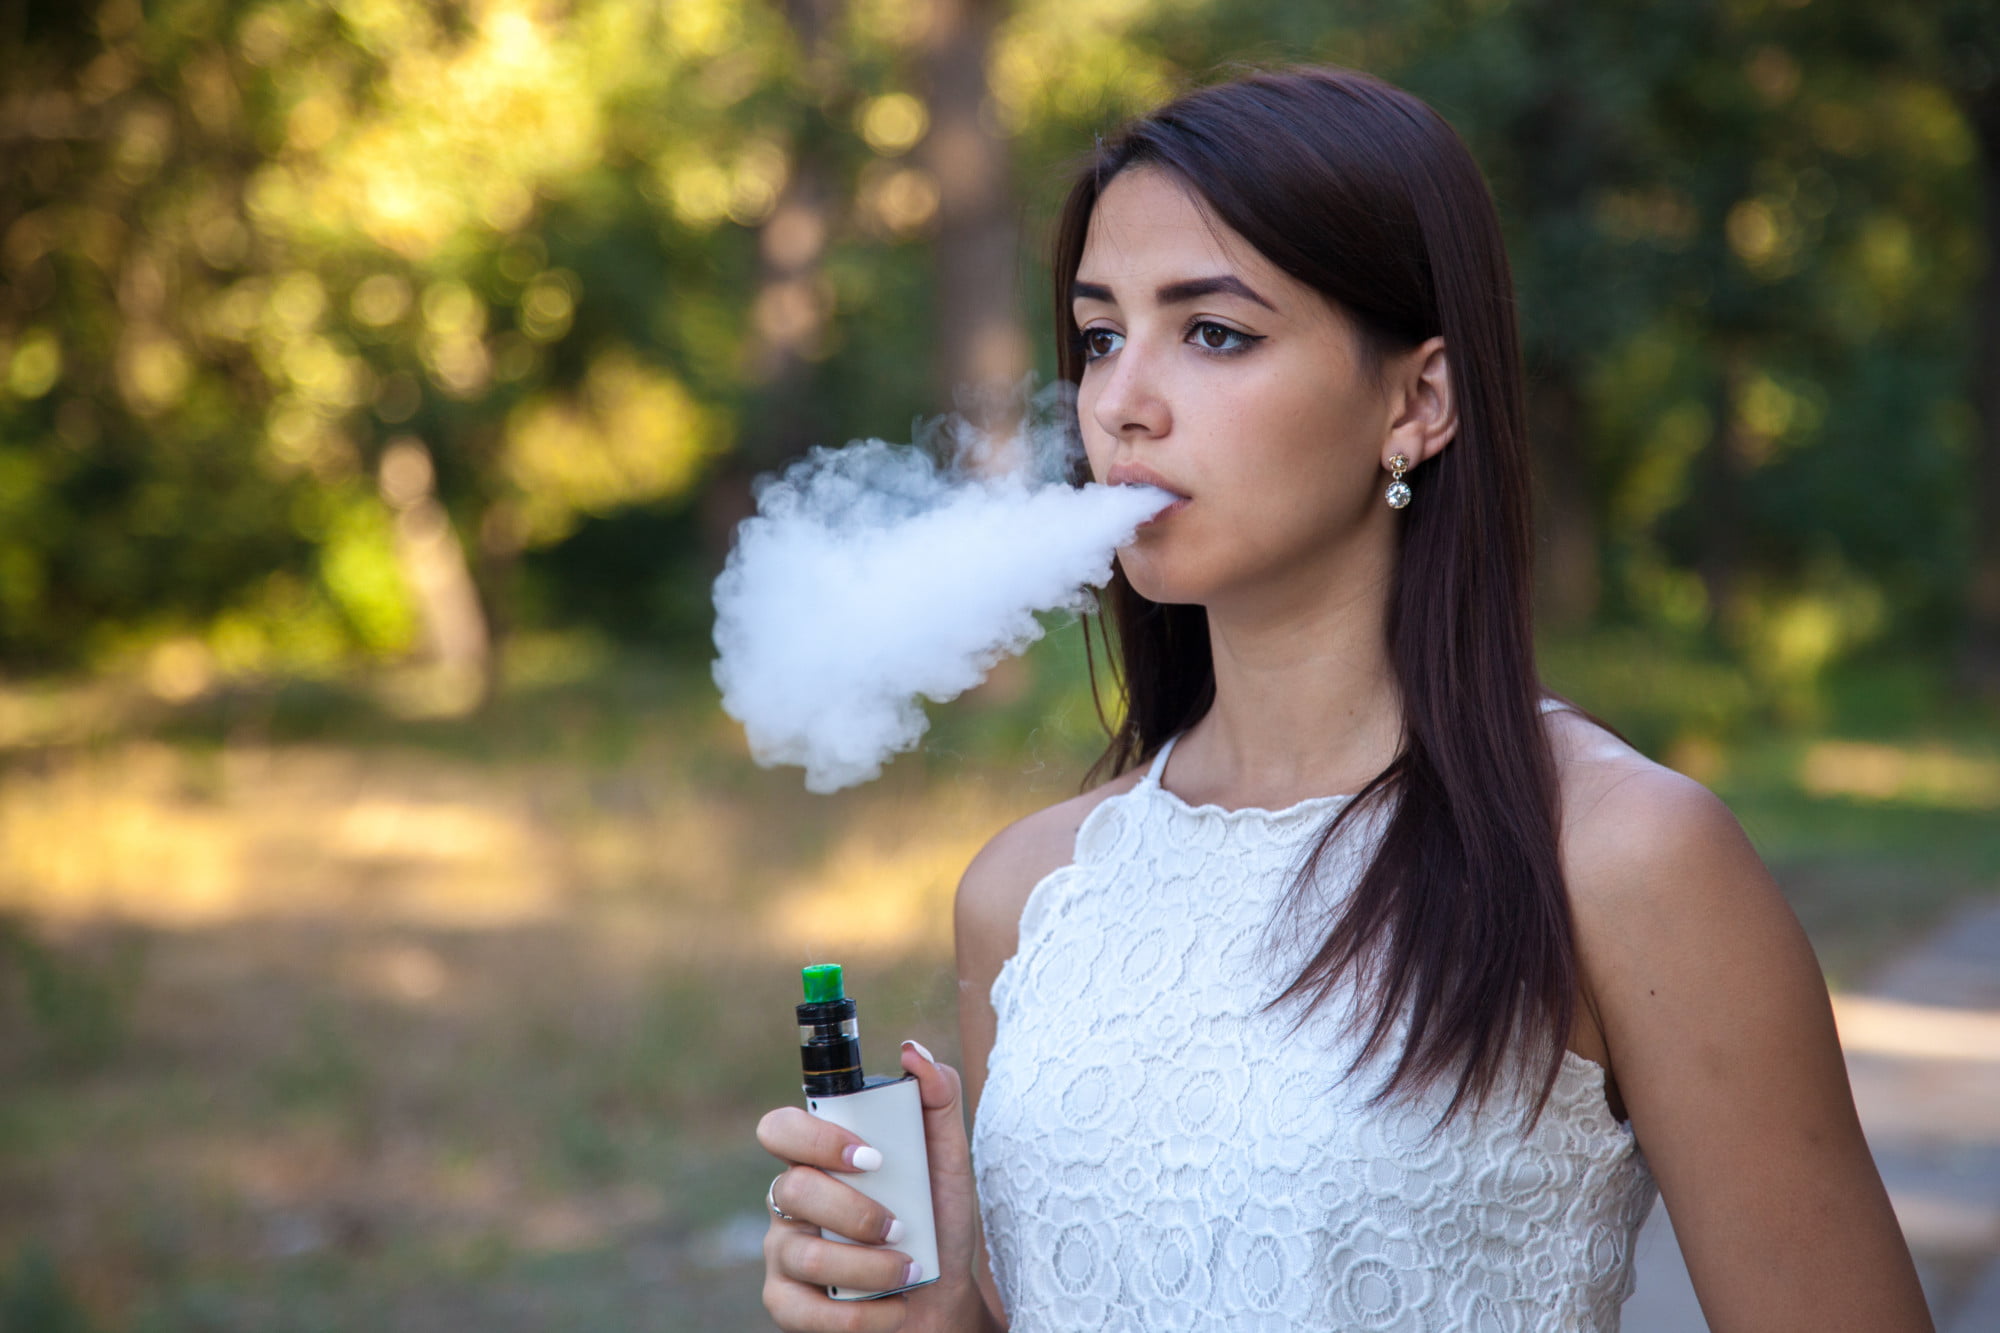 Is vaping safe? While vaping is considered safer than smoking cigarettes, click here to discover the facts that you need to know.